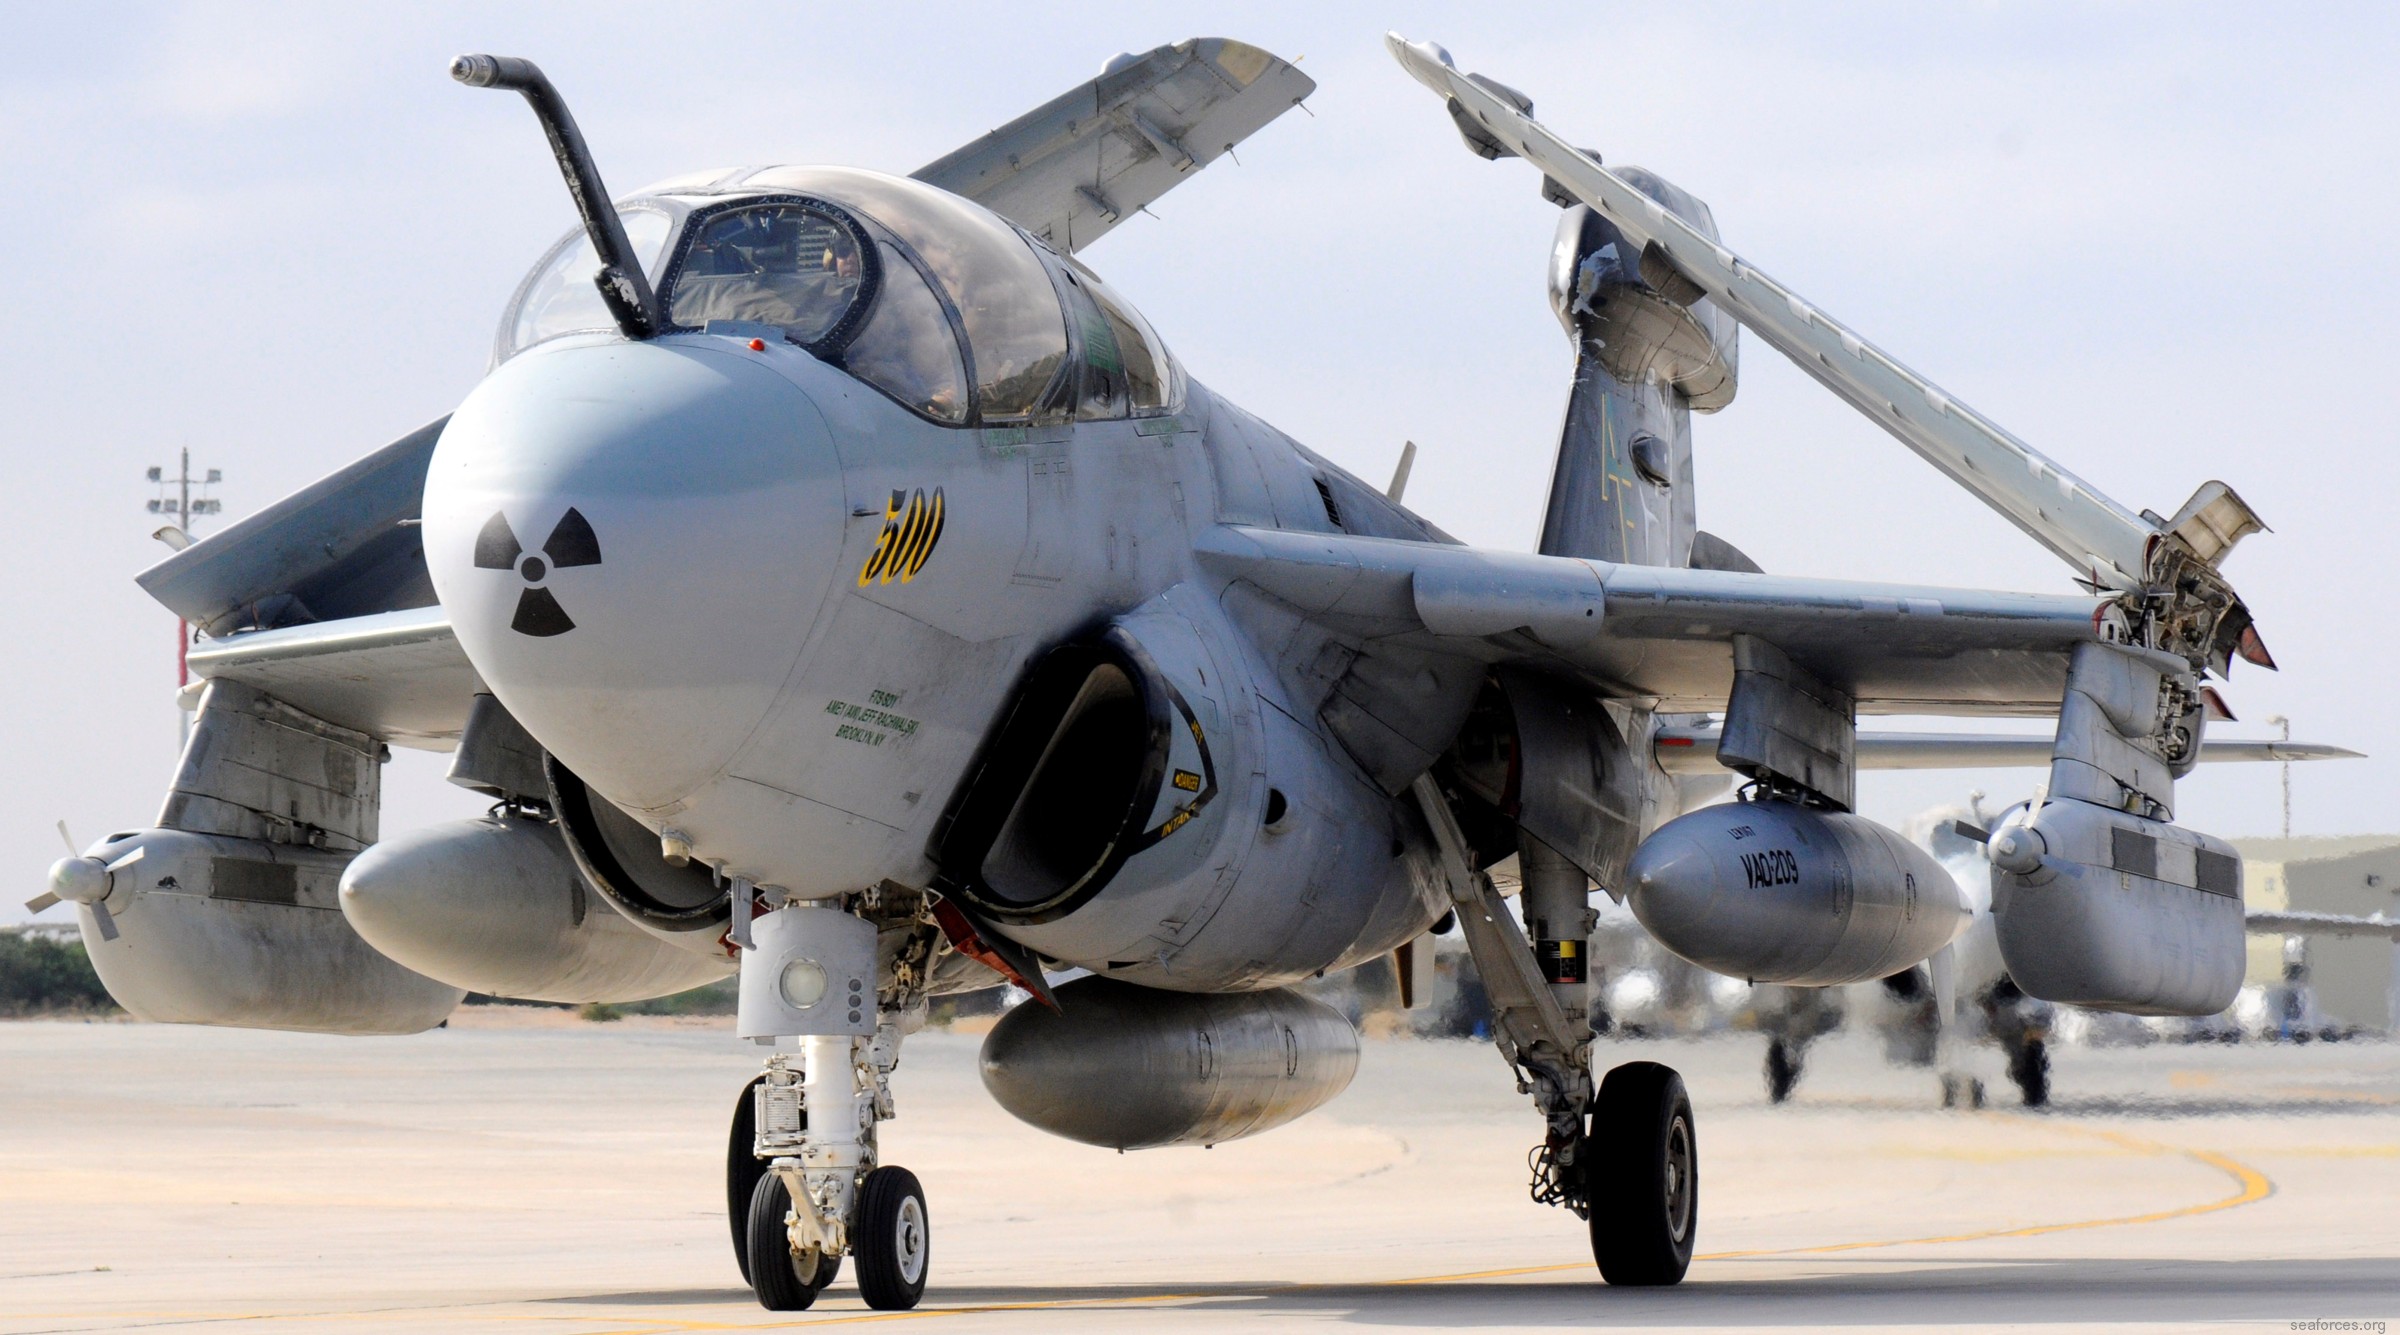 vaq-209 star warriors electronic attack squadron navy ea-6b prowler 04